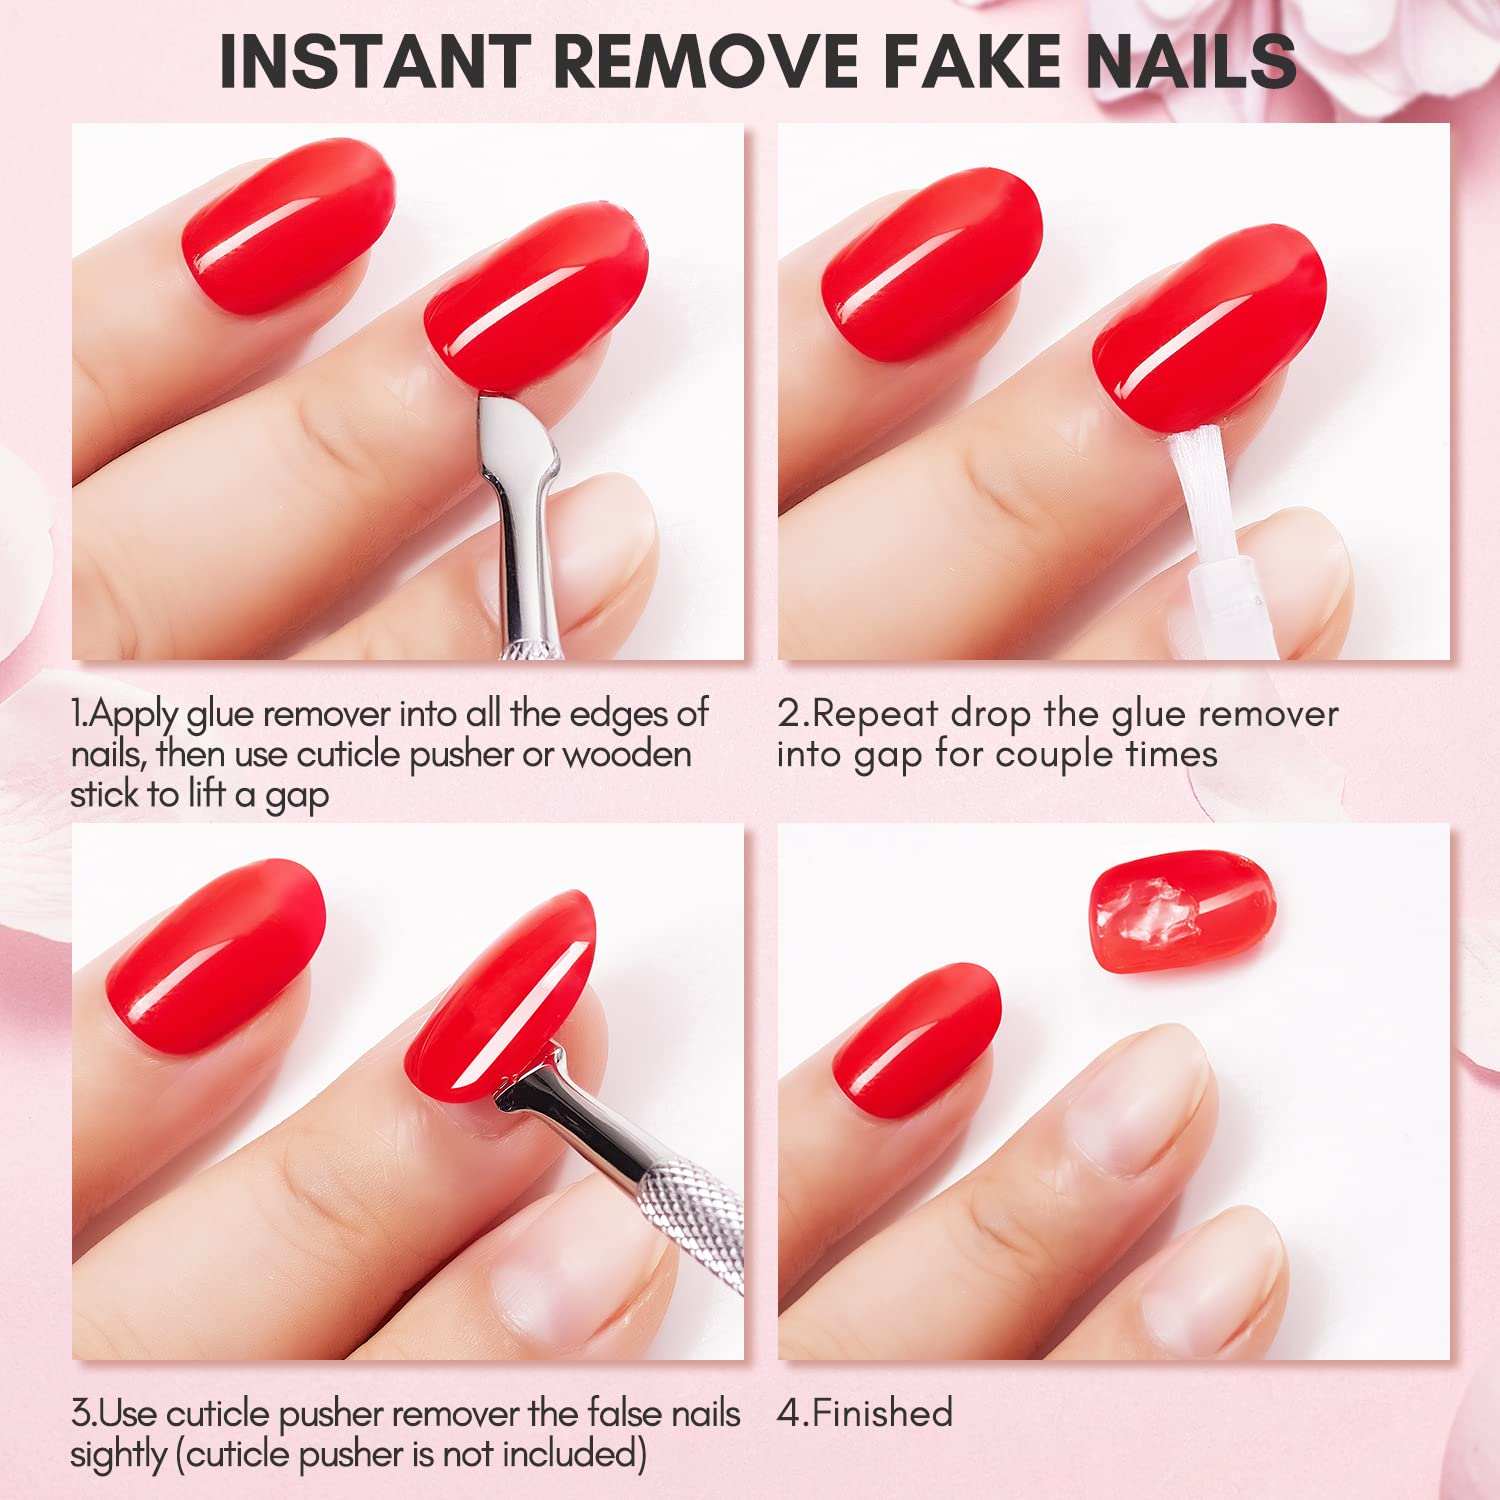 How to stick fake nails without Glue in seconds #nailhacks - YouTube